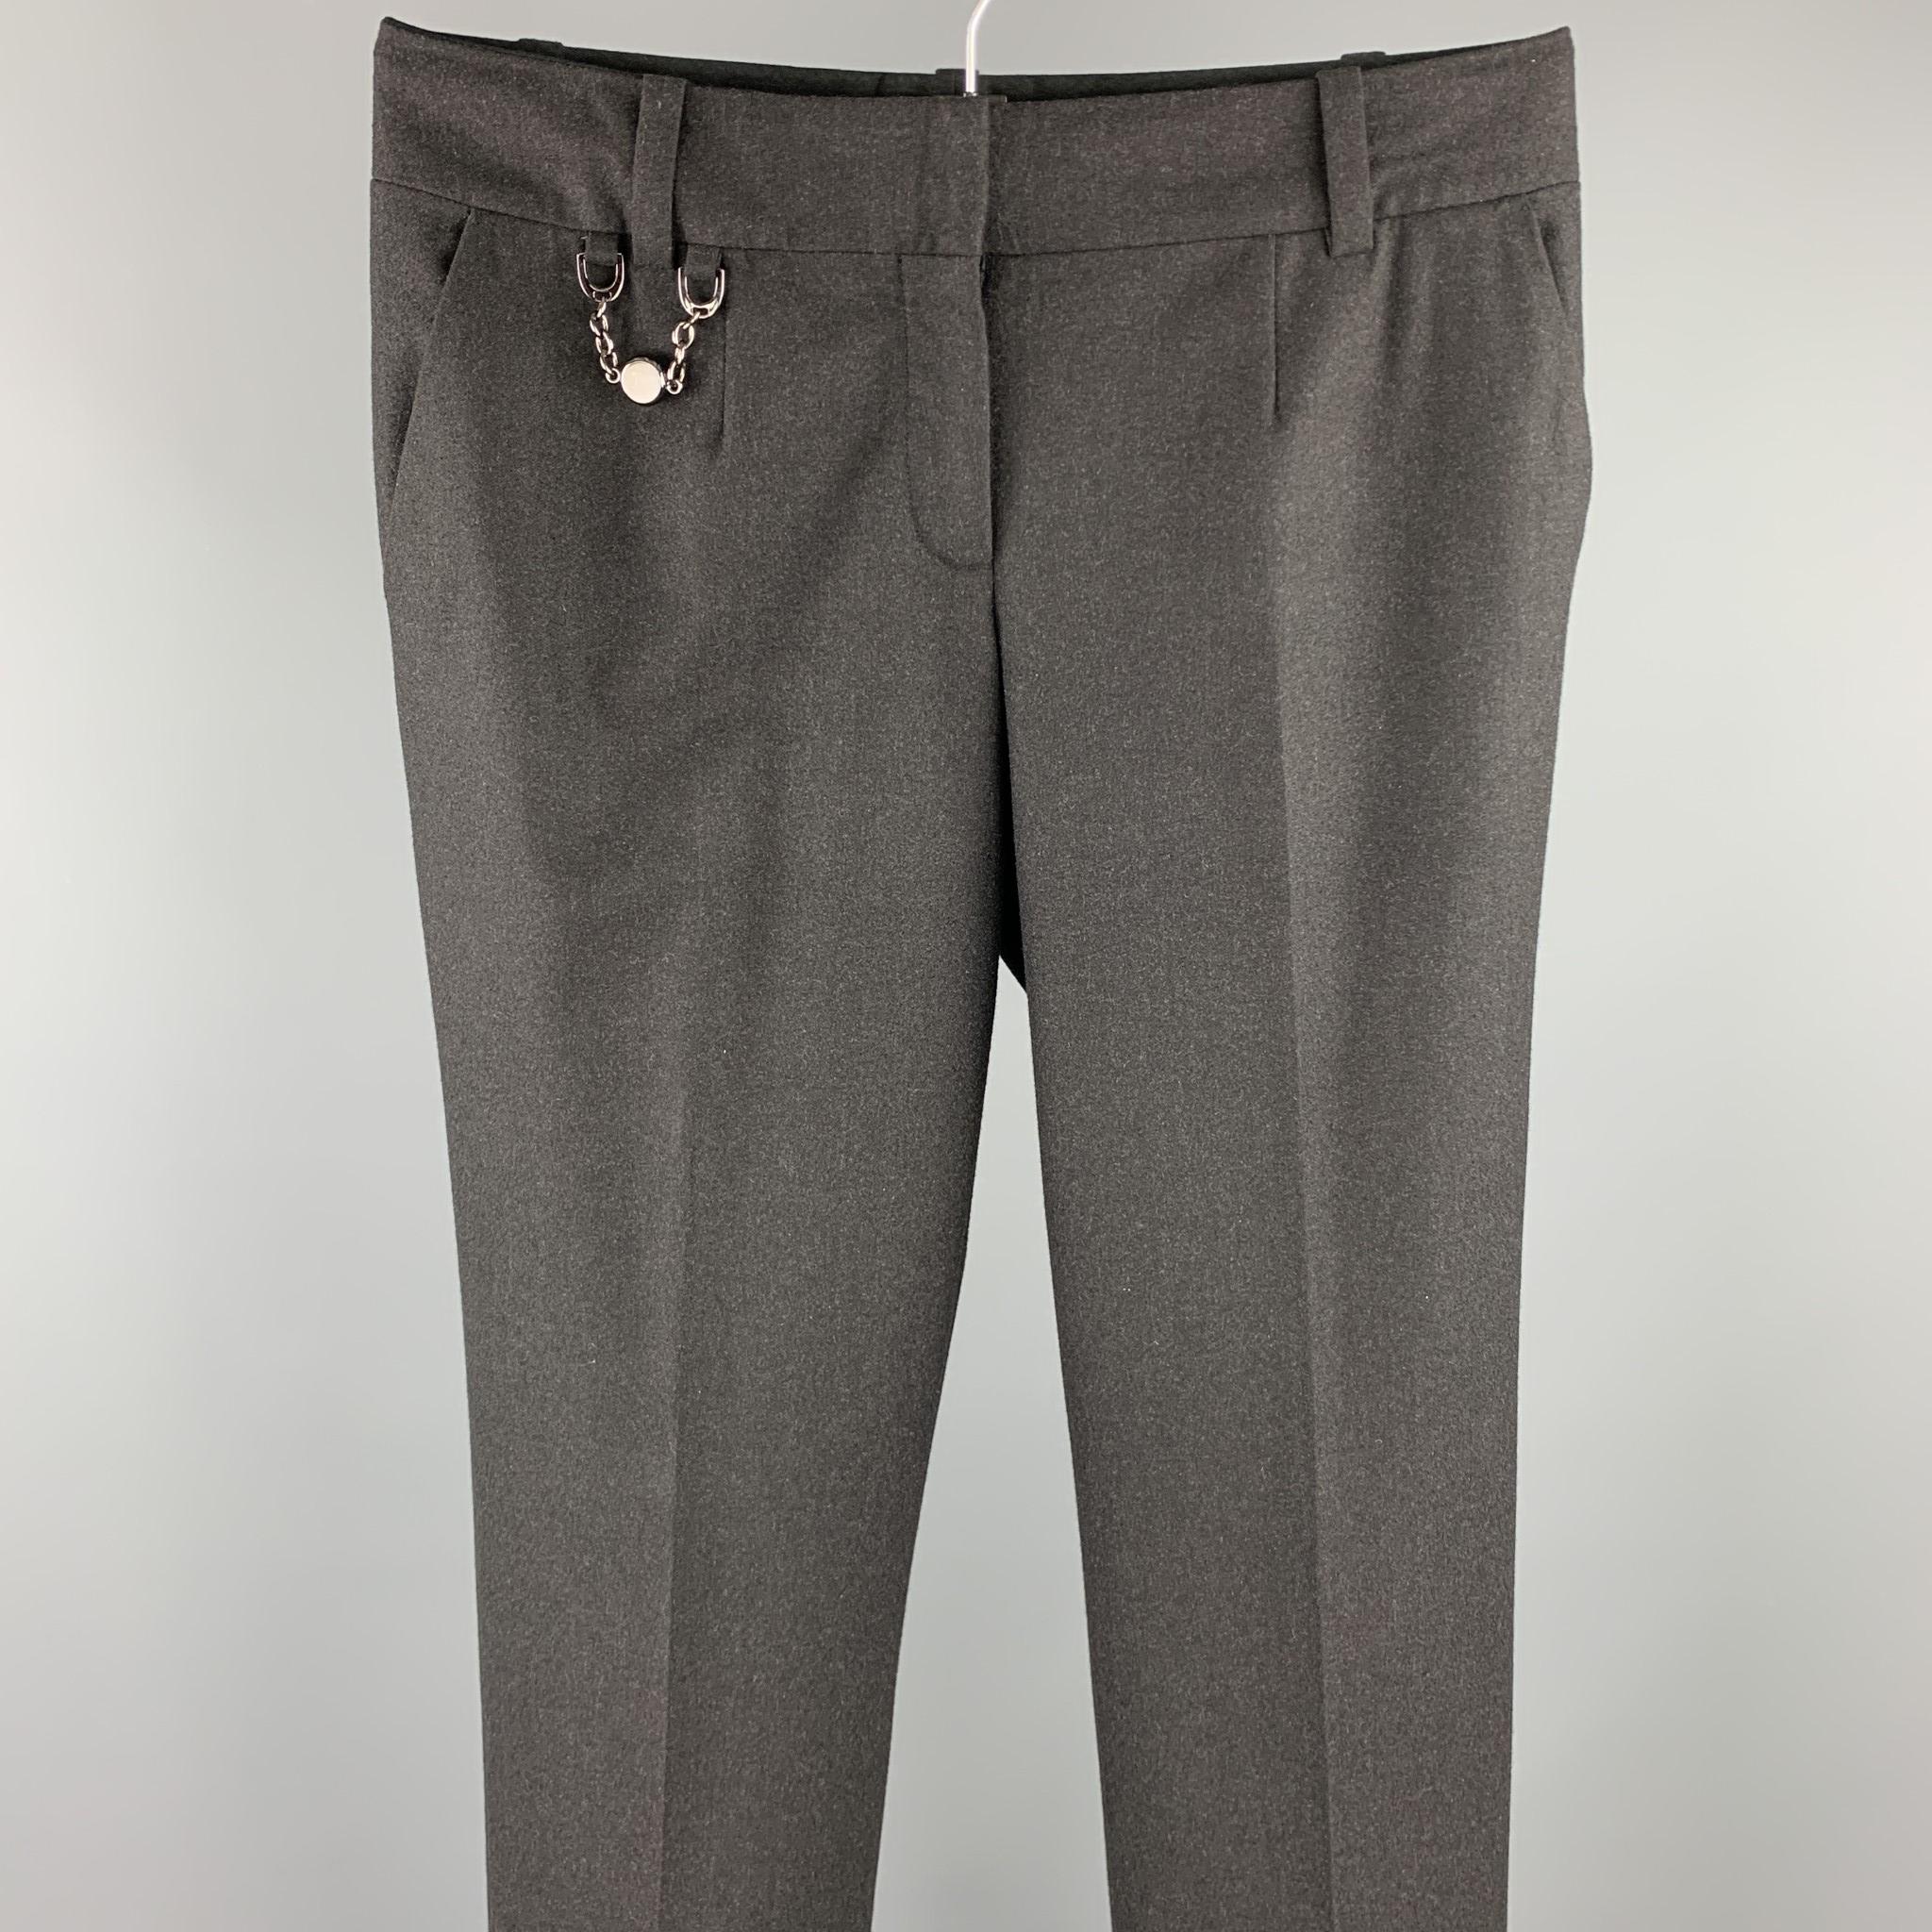 CELINE dress pants comes in a charcoal wool / elastane featuring a wide leg, metal chain detail, and a zip fly closure. 

Excellent Pre-Owned Condition.
Marked: 40

Measurements:

Waist: 32 in. 
Rise: 7.5 in. 
Inseam: 31 in. 